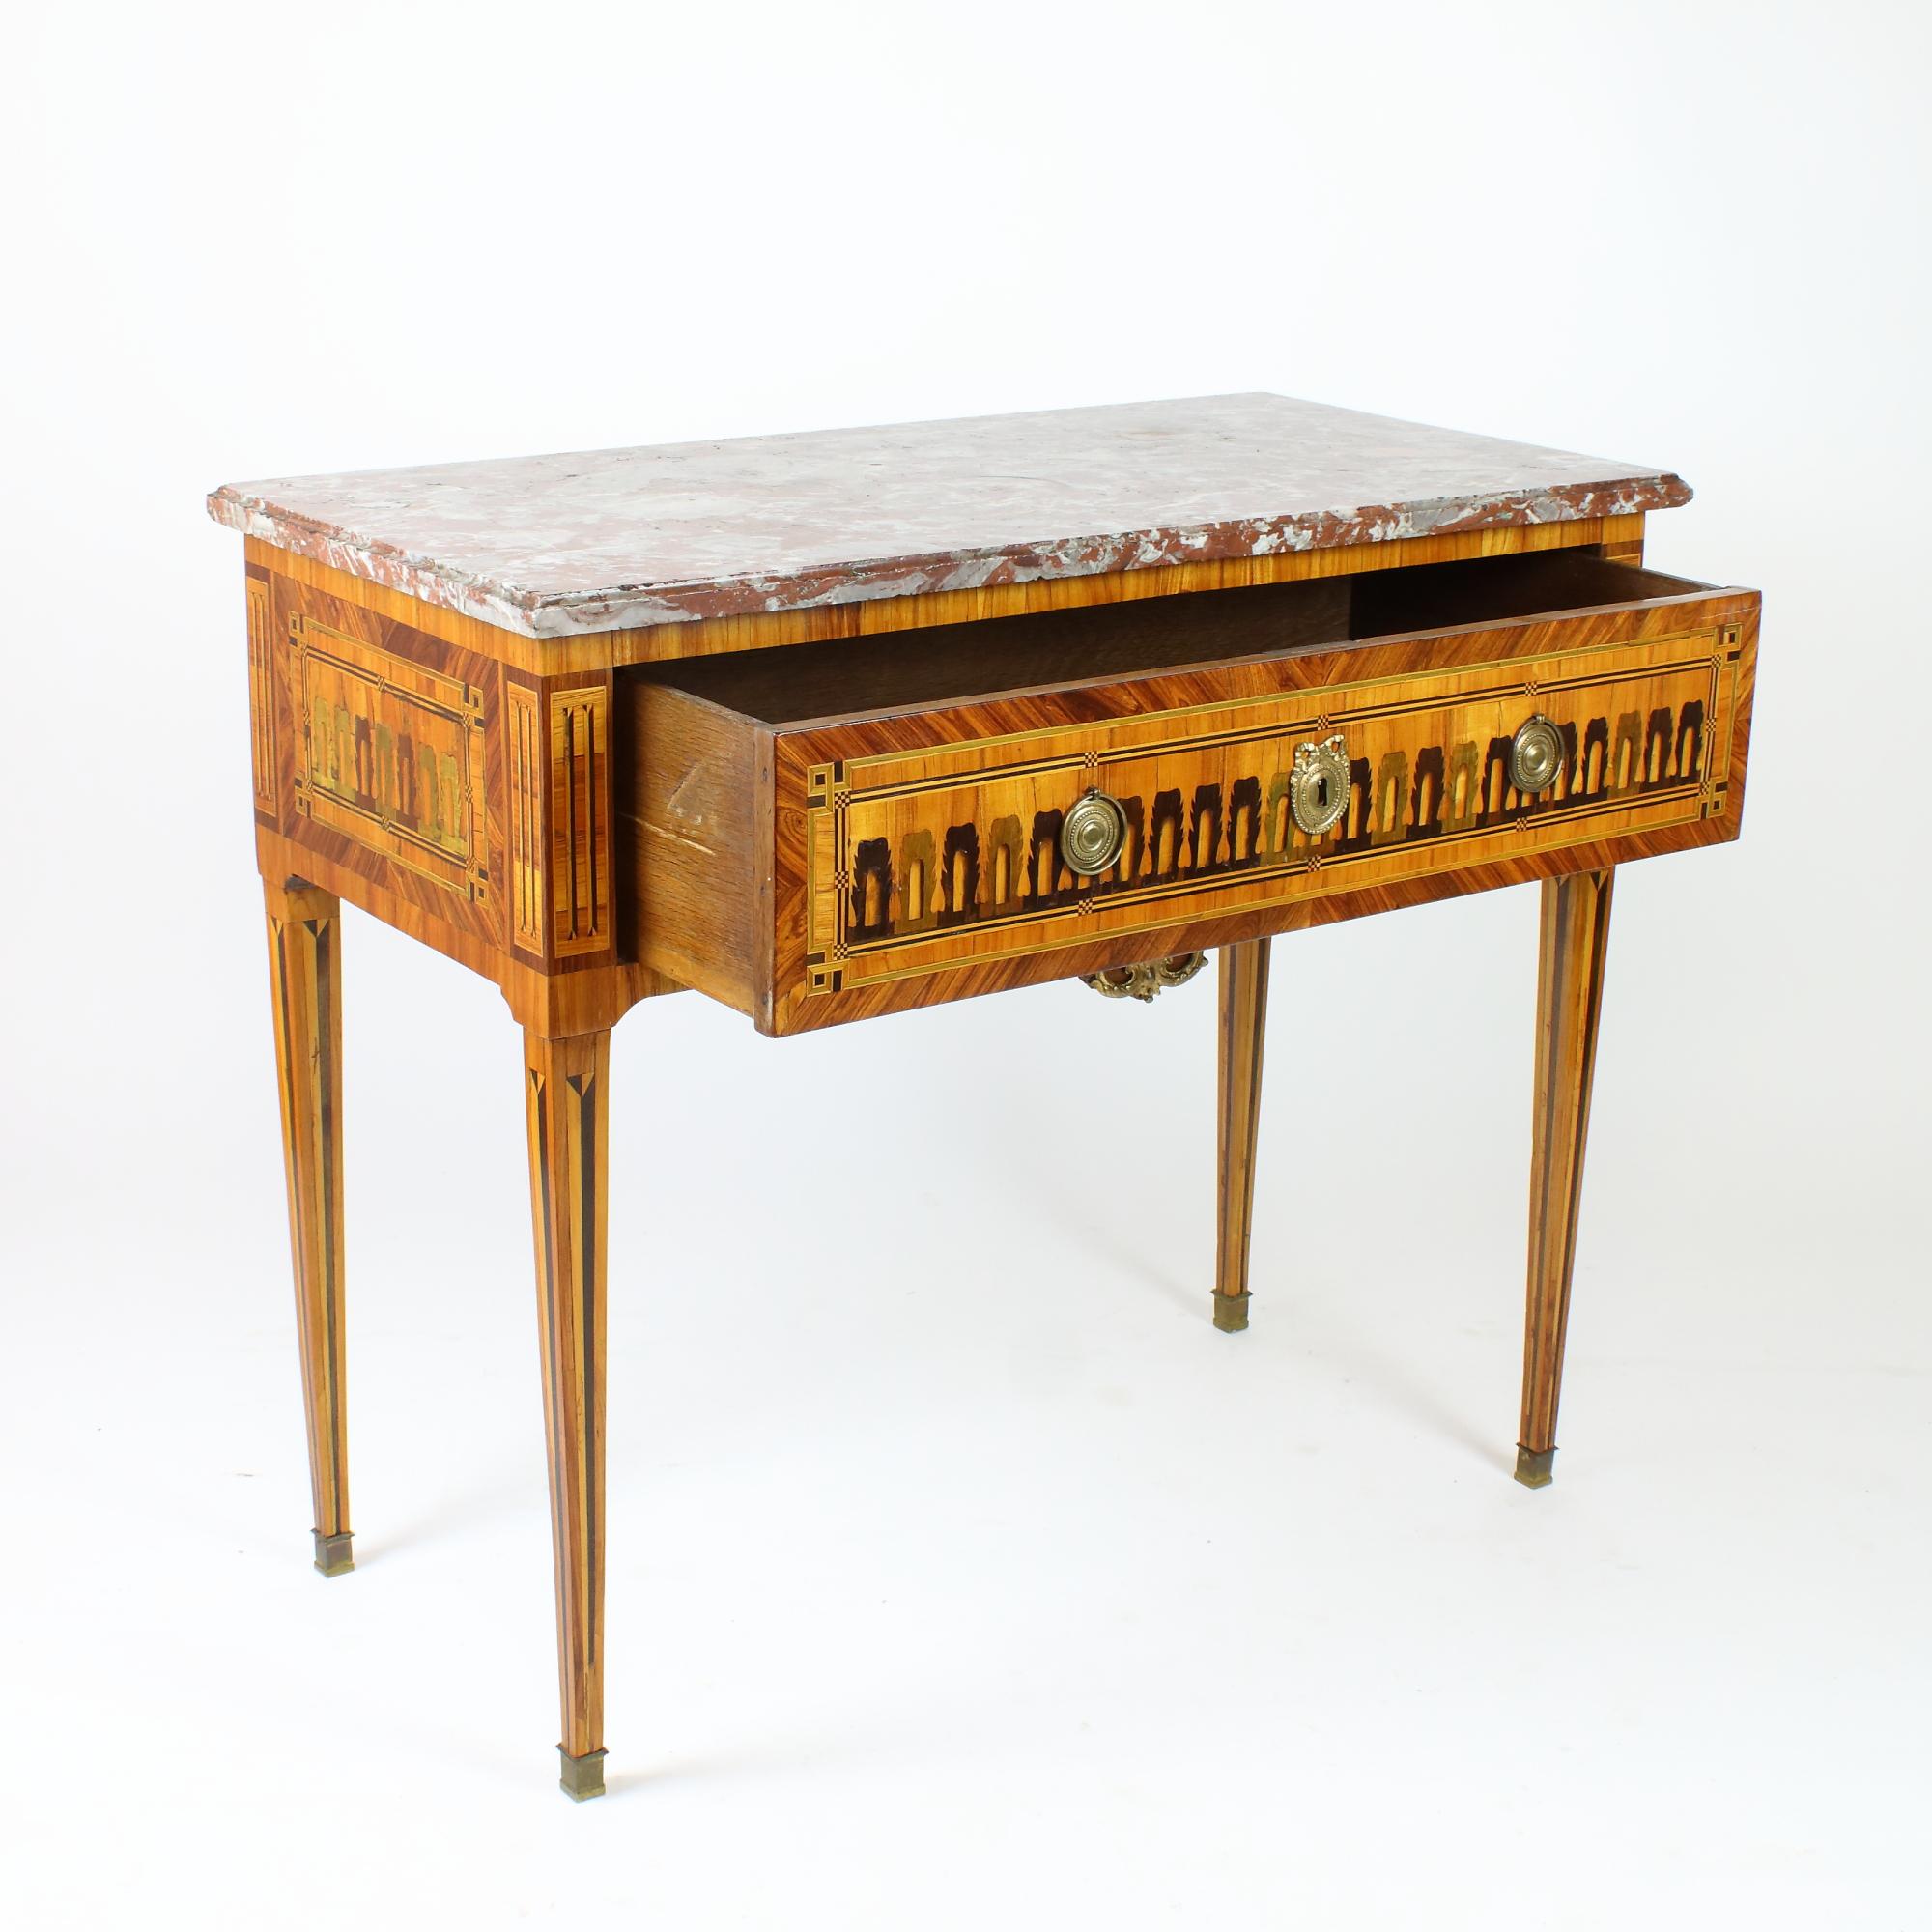 18th century French Louis XVI neoclassical marquetry console table

A rectangular console table with one frieze drawer standing on four square, slender and tapering legs with trompe l'oeil fluting marquetry. The drawer as well as the sides